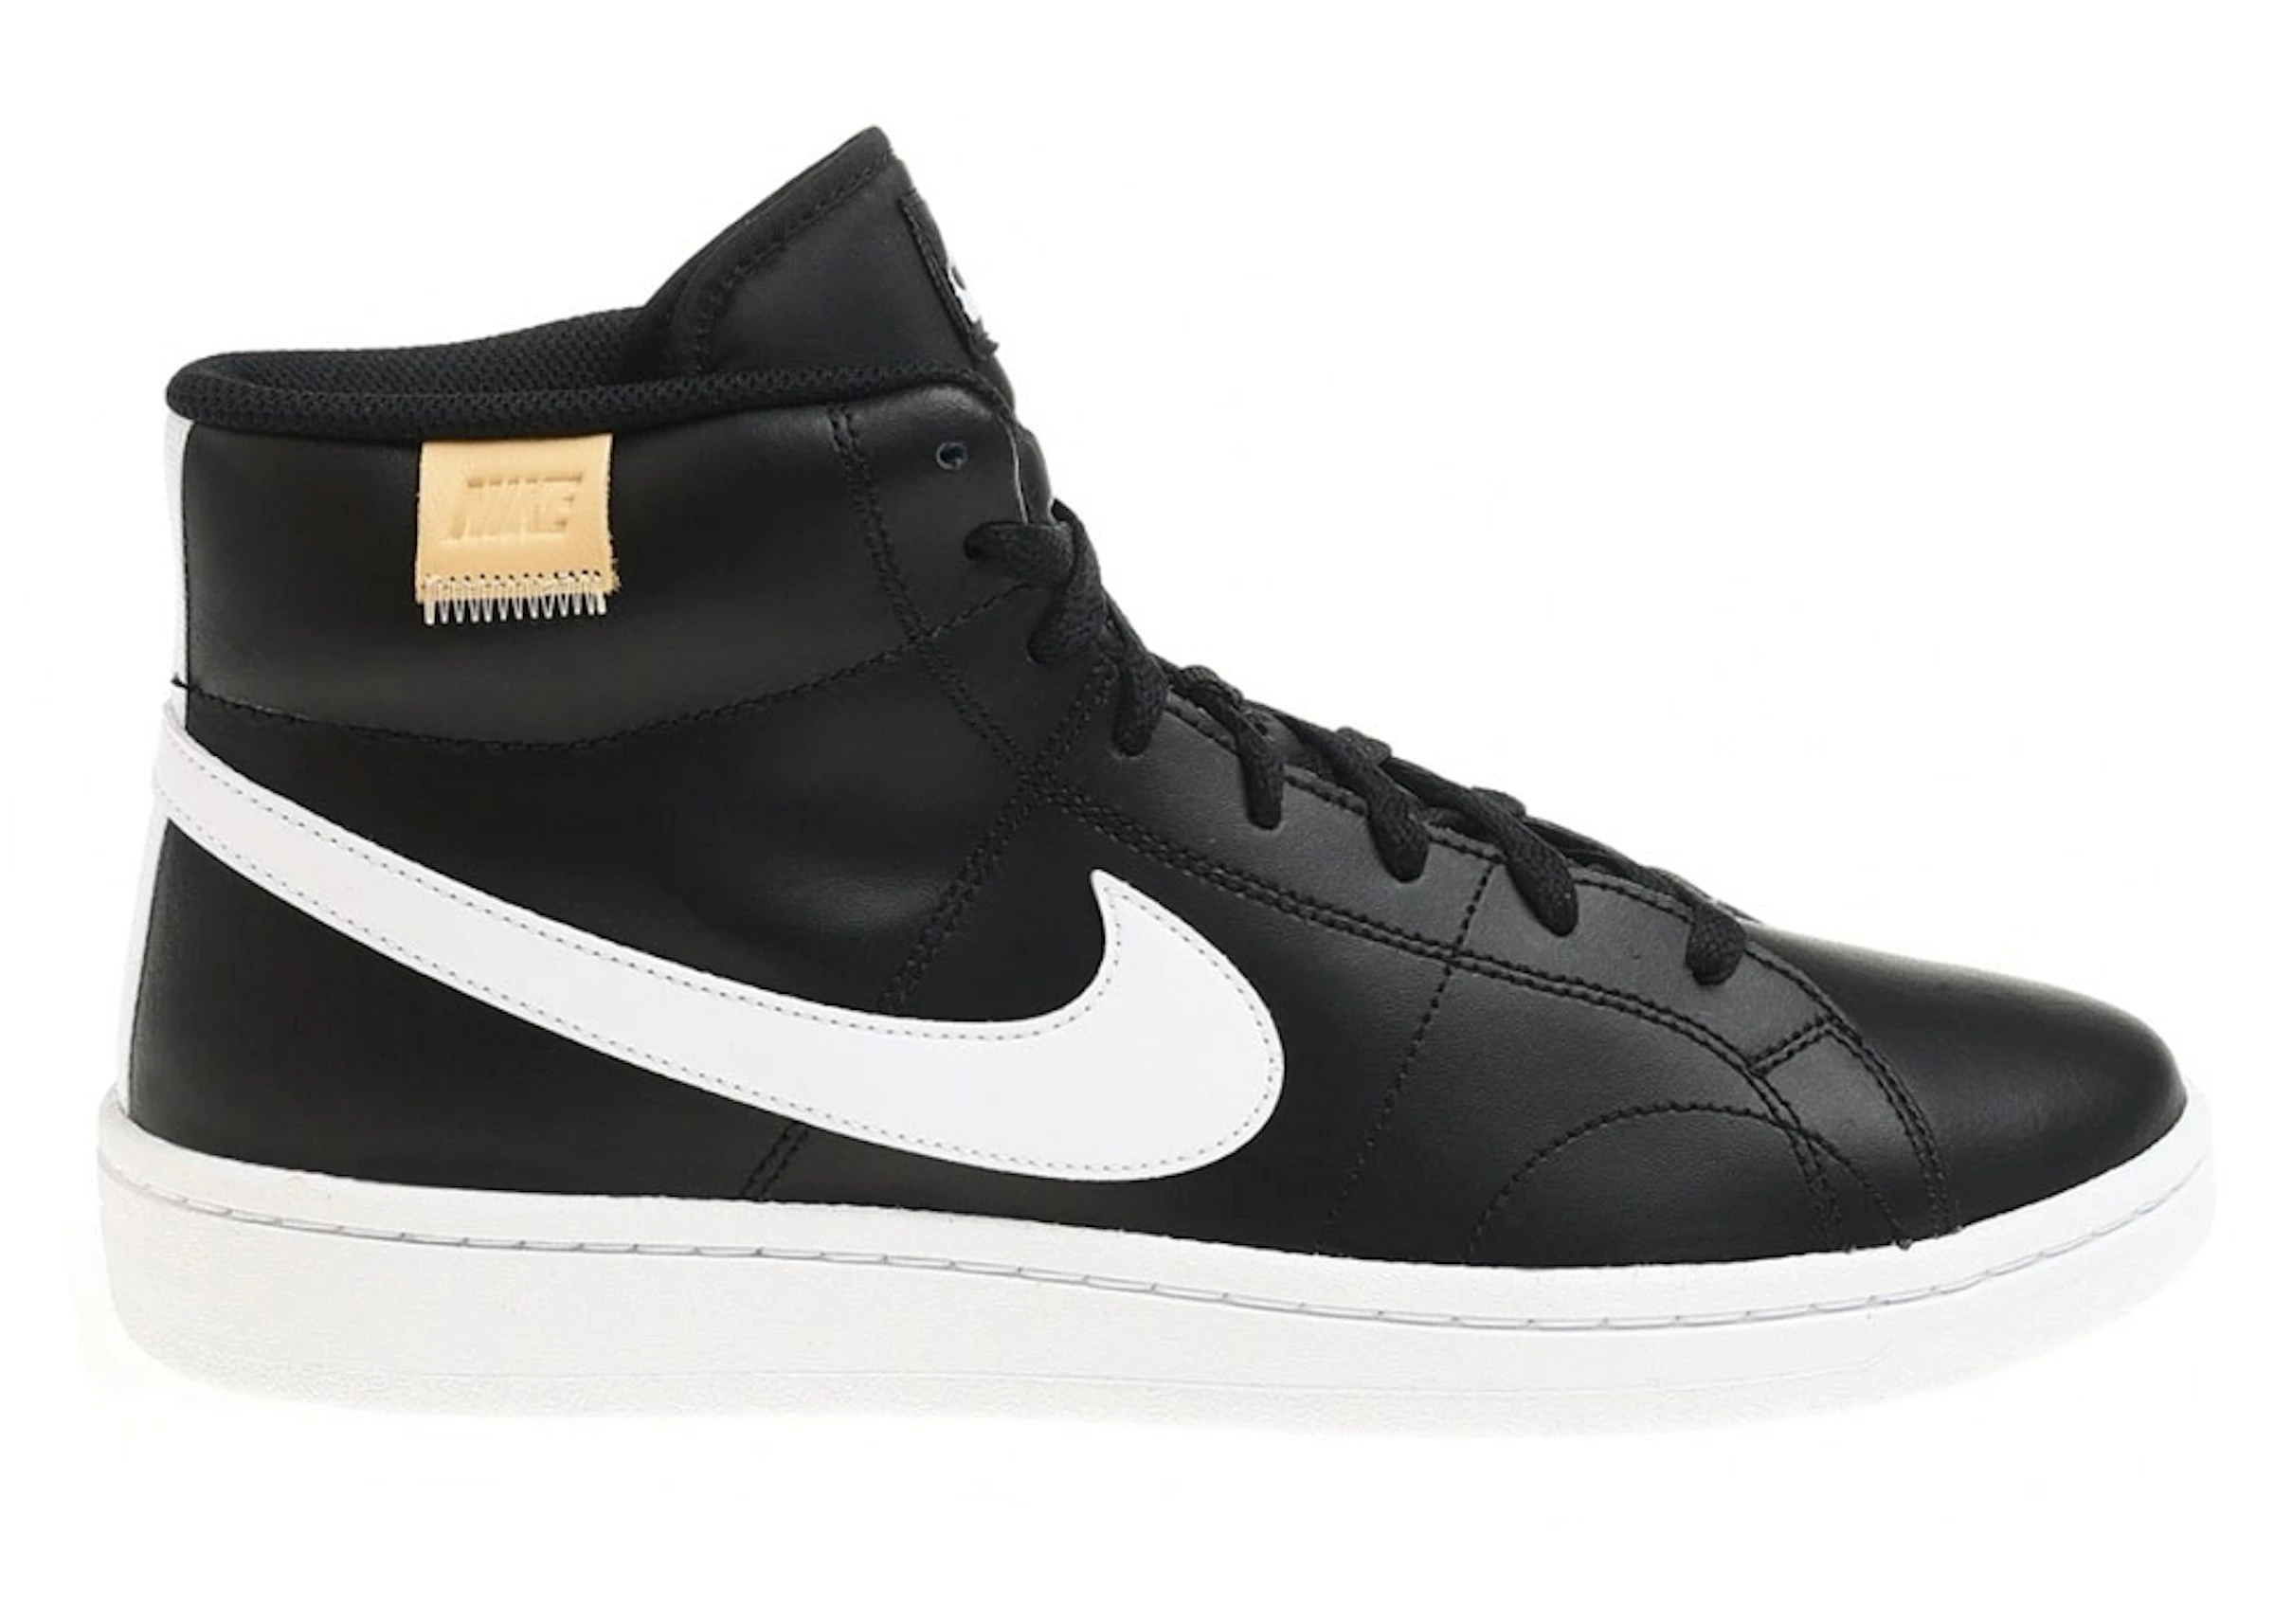 Huh The guests Prevail Nike Court Royale 2 Black White - CQ9179-001 - US